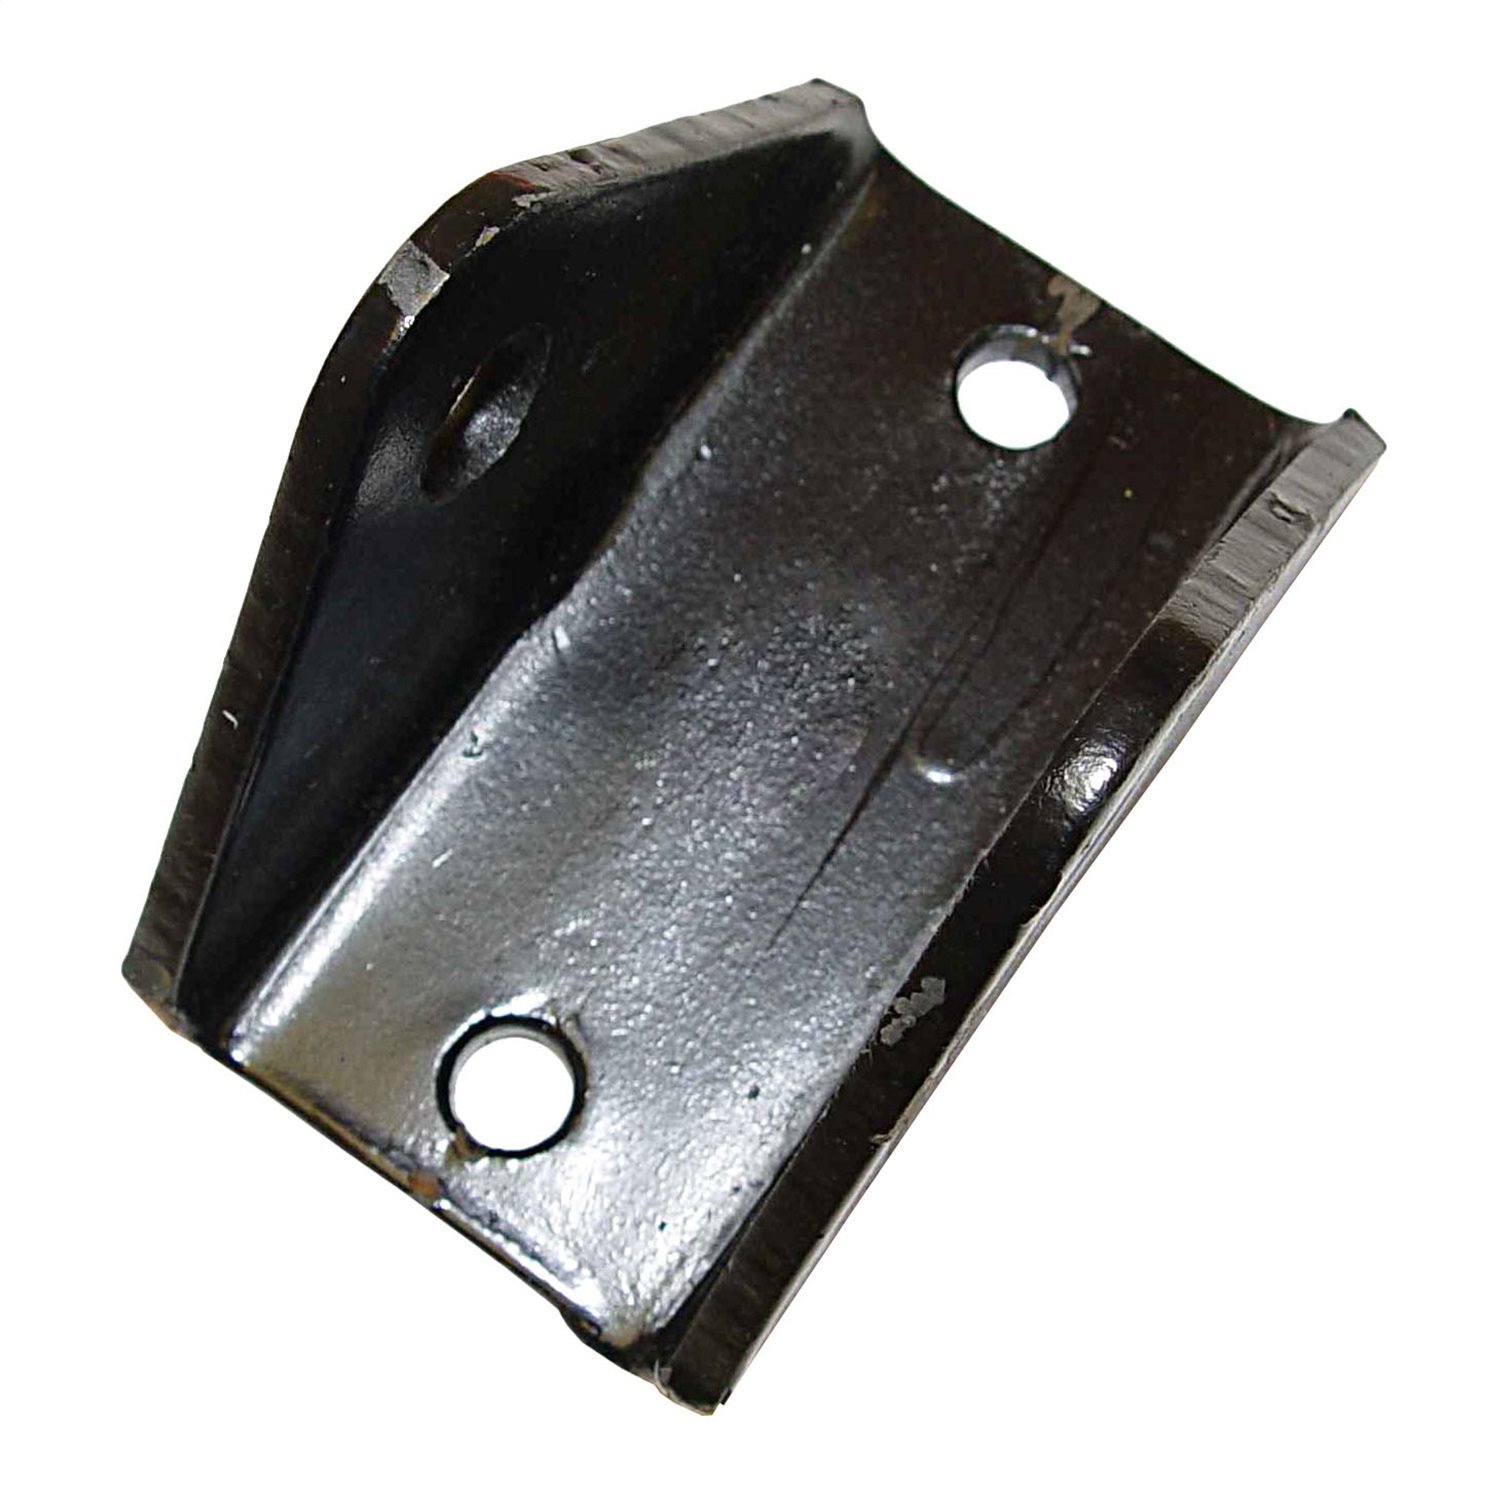 Replacement leaf spring pivot bracket from Omix-ADA, Fits 41-68 Willys and Jeep models